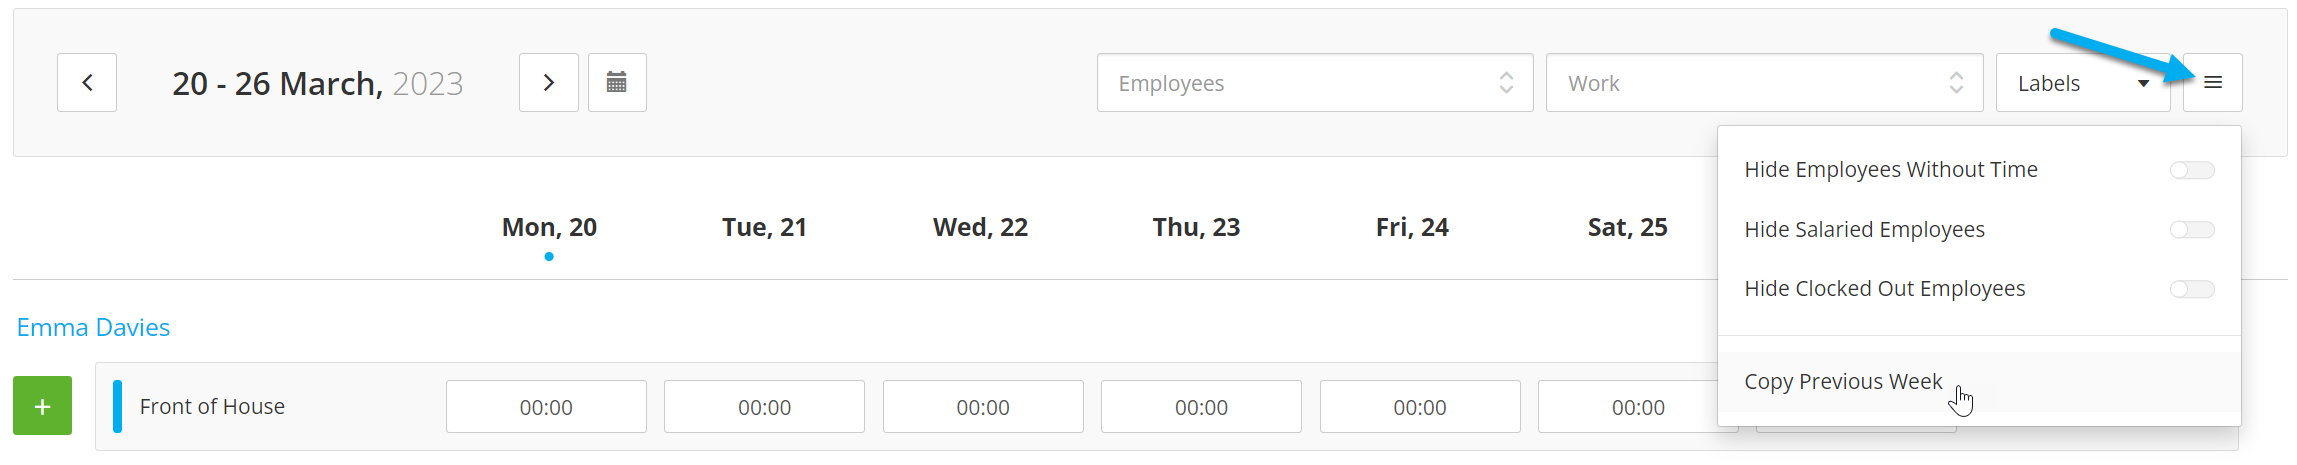 Timesheets_for_Managers_-_Copy_Previous_Week.png